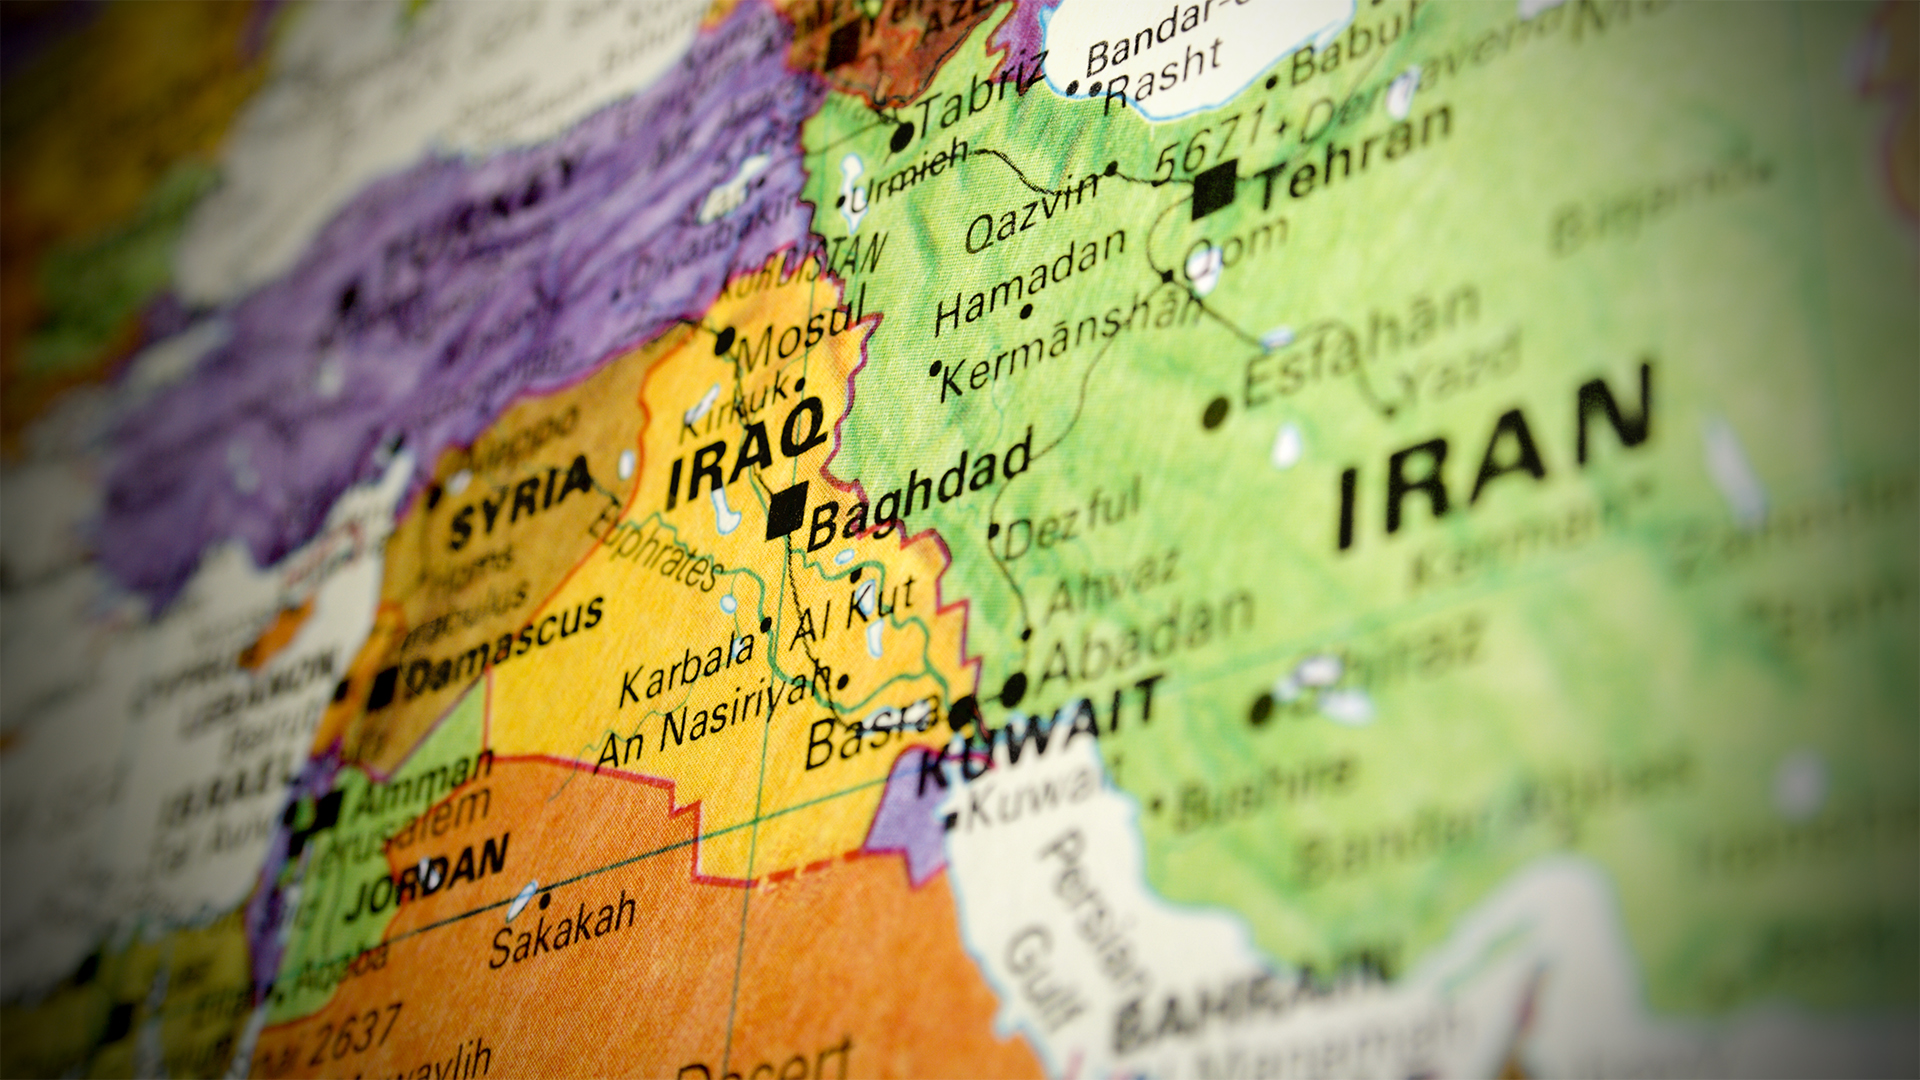 A photo of a map of Iraq and Iran.